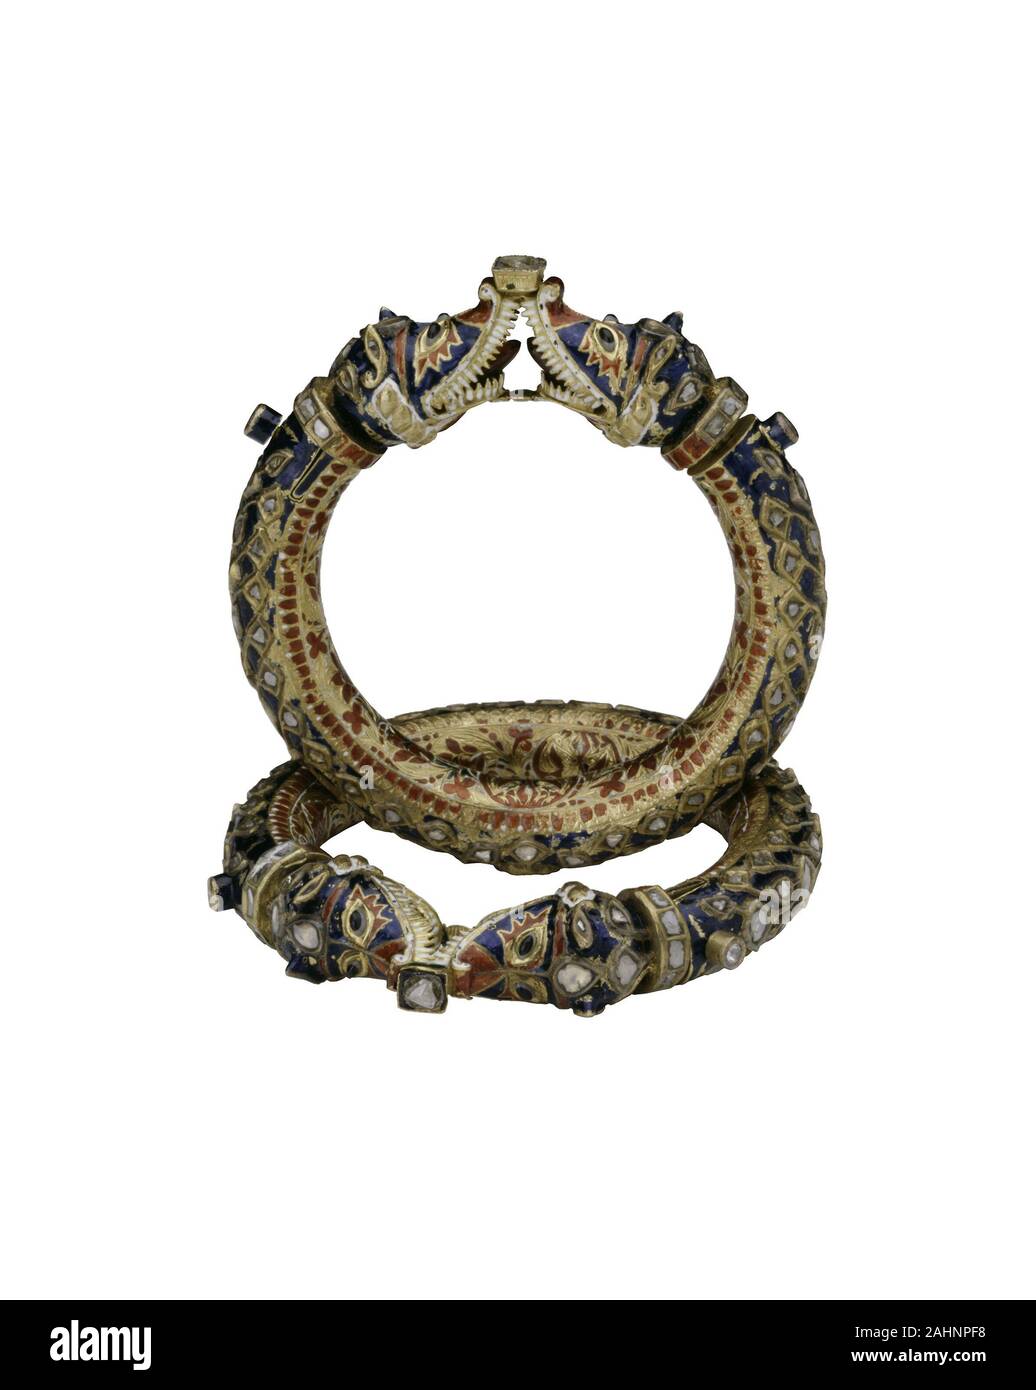 Bracelets with Confronting Makara Heads (Karas). 1801–1900. India. Gold, diamonds, and crystalline inset in the kundan technique, with polychrome enamel (minakari) Stock Photo